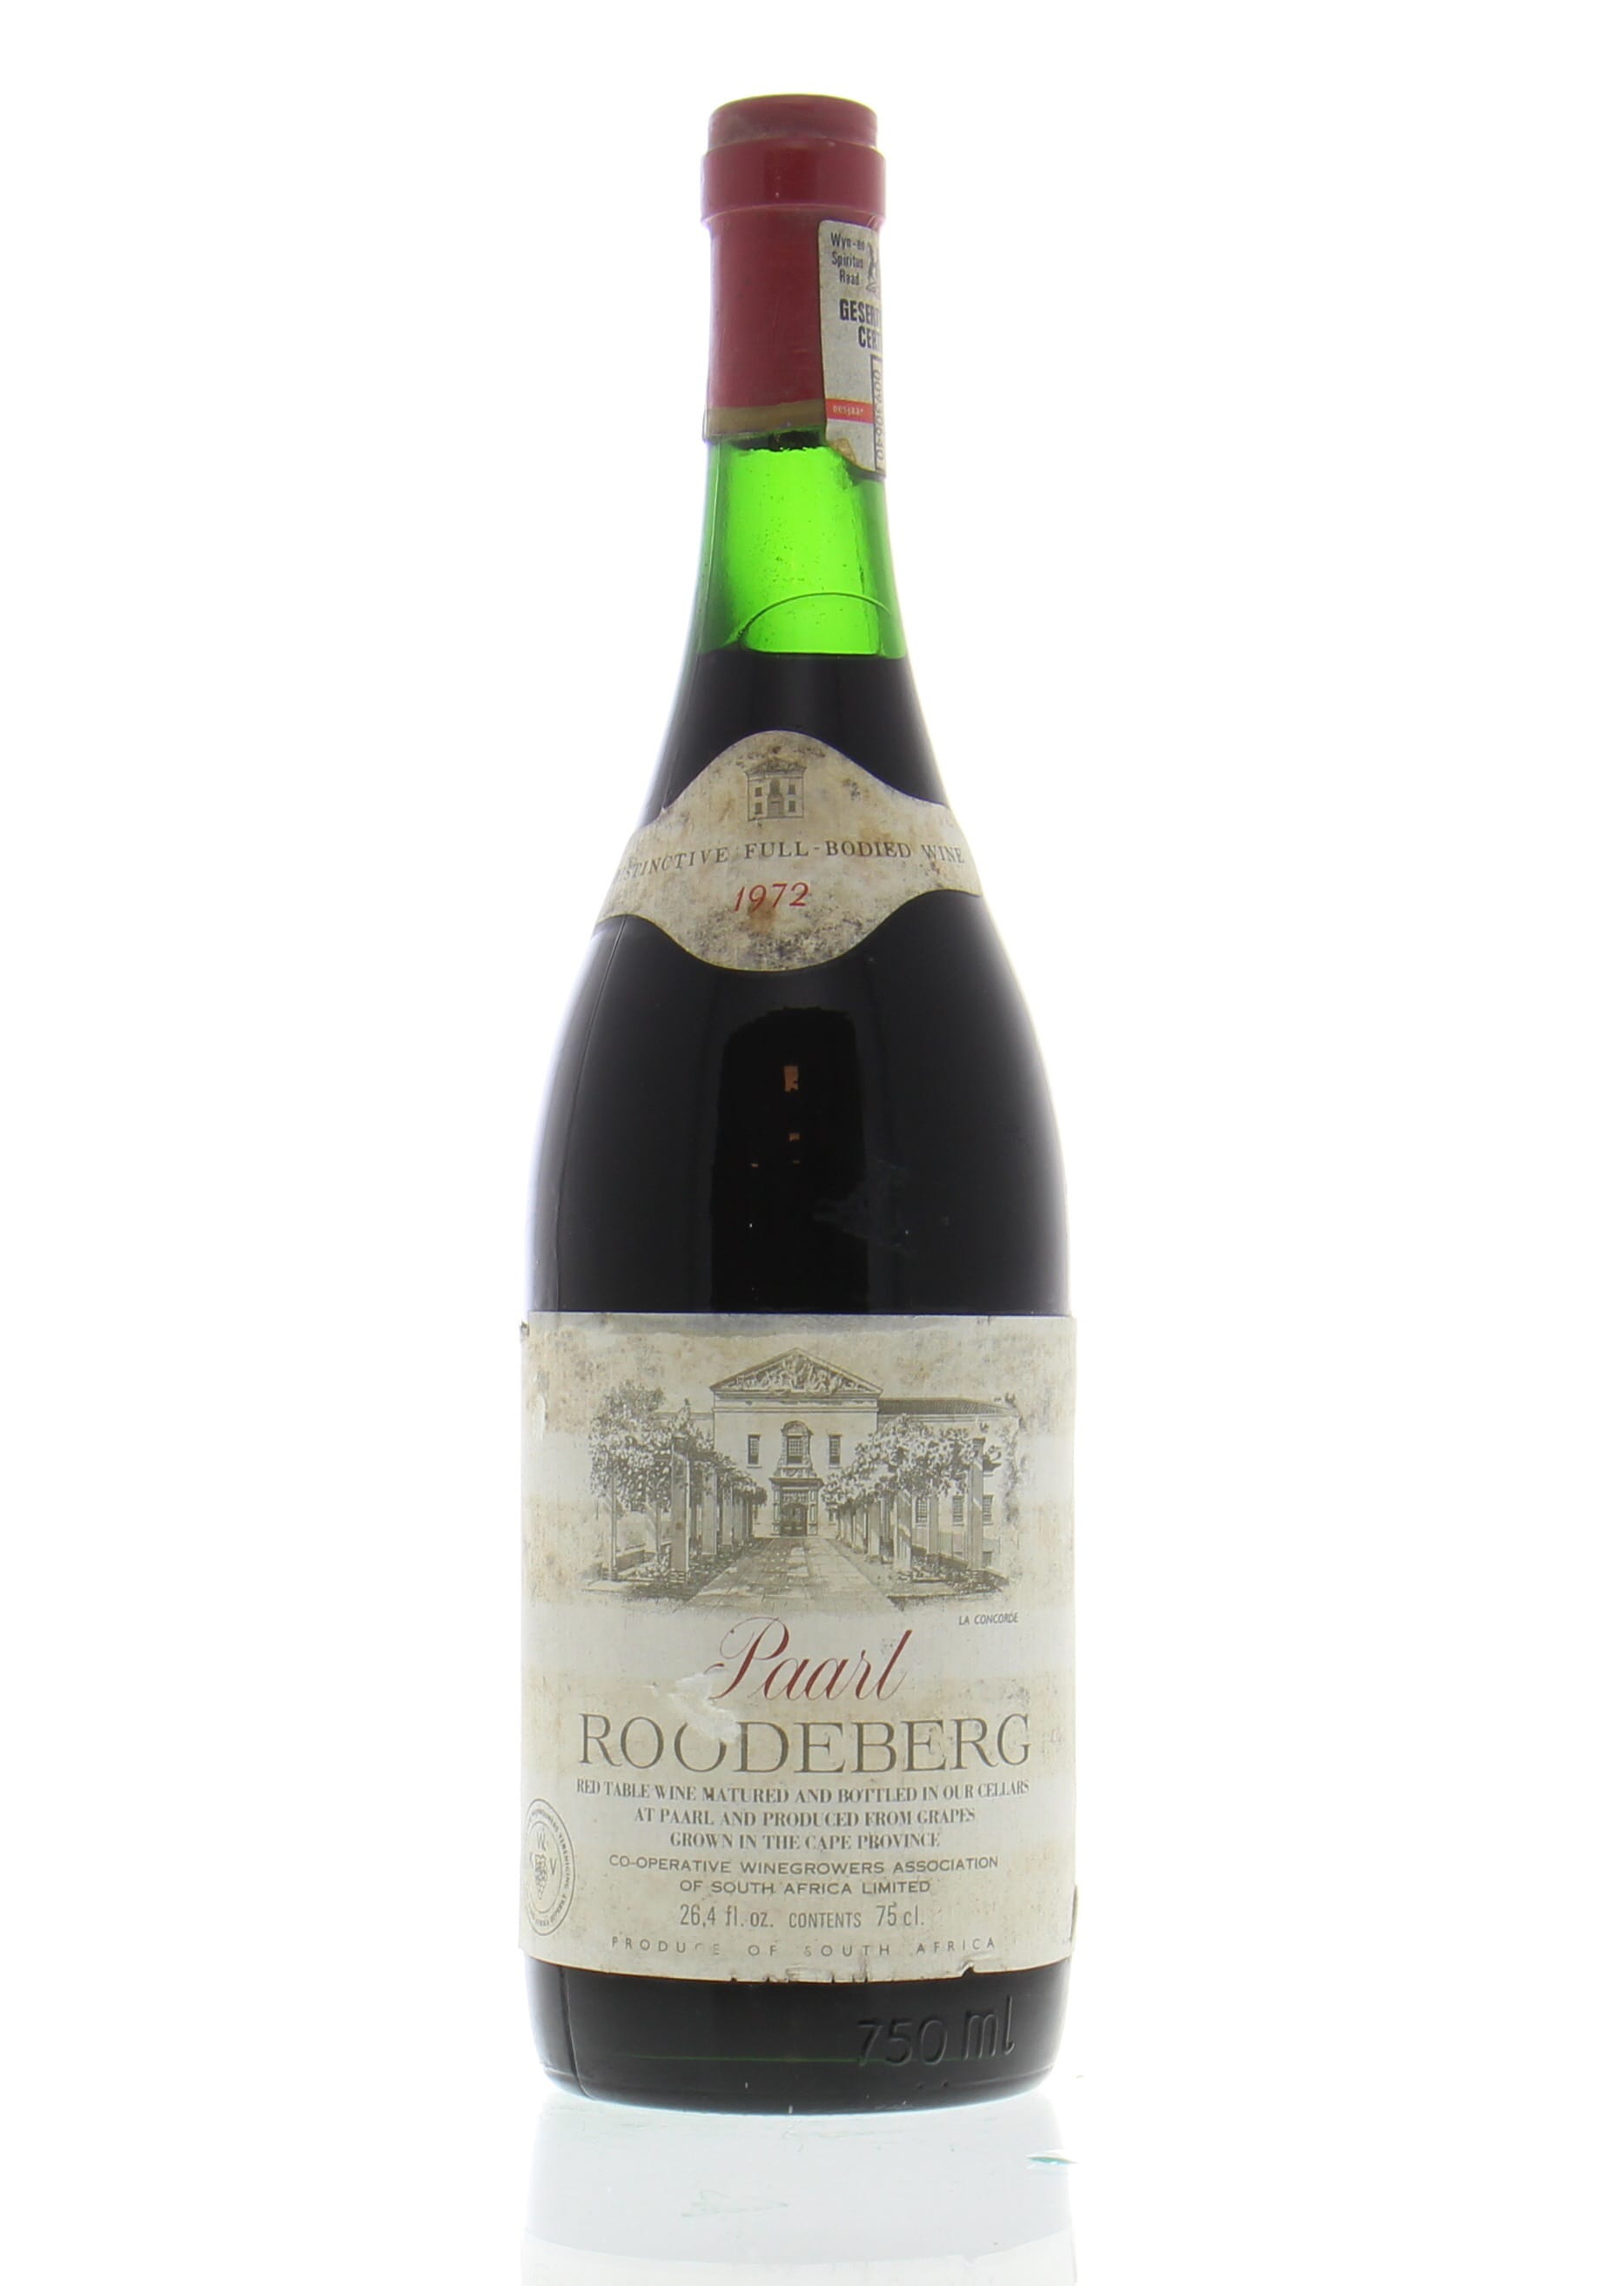 Paarl Roodenberg - Red wine 1972